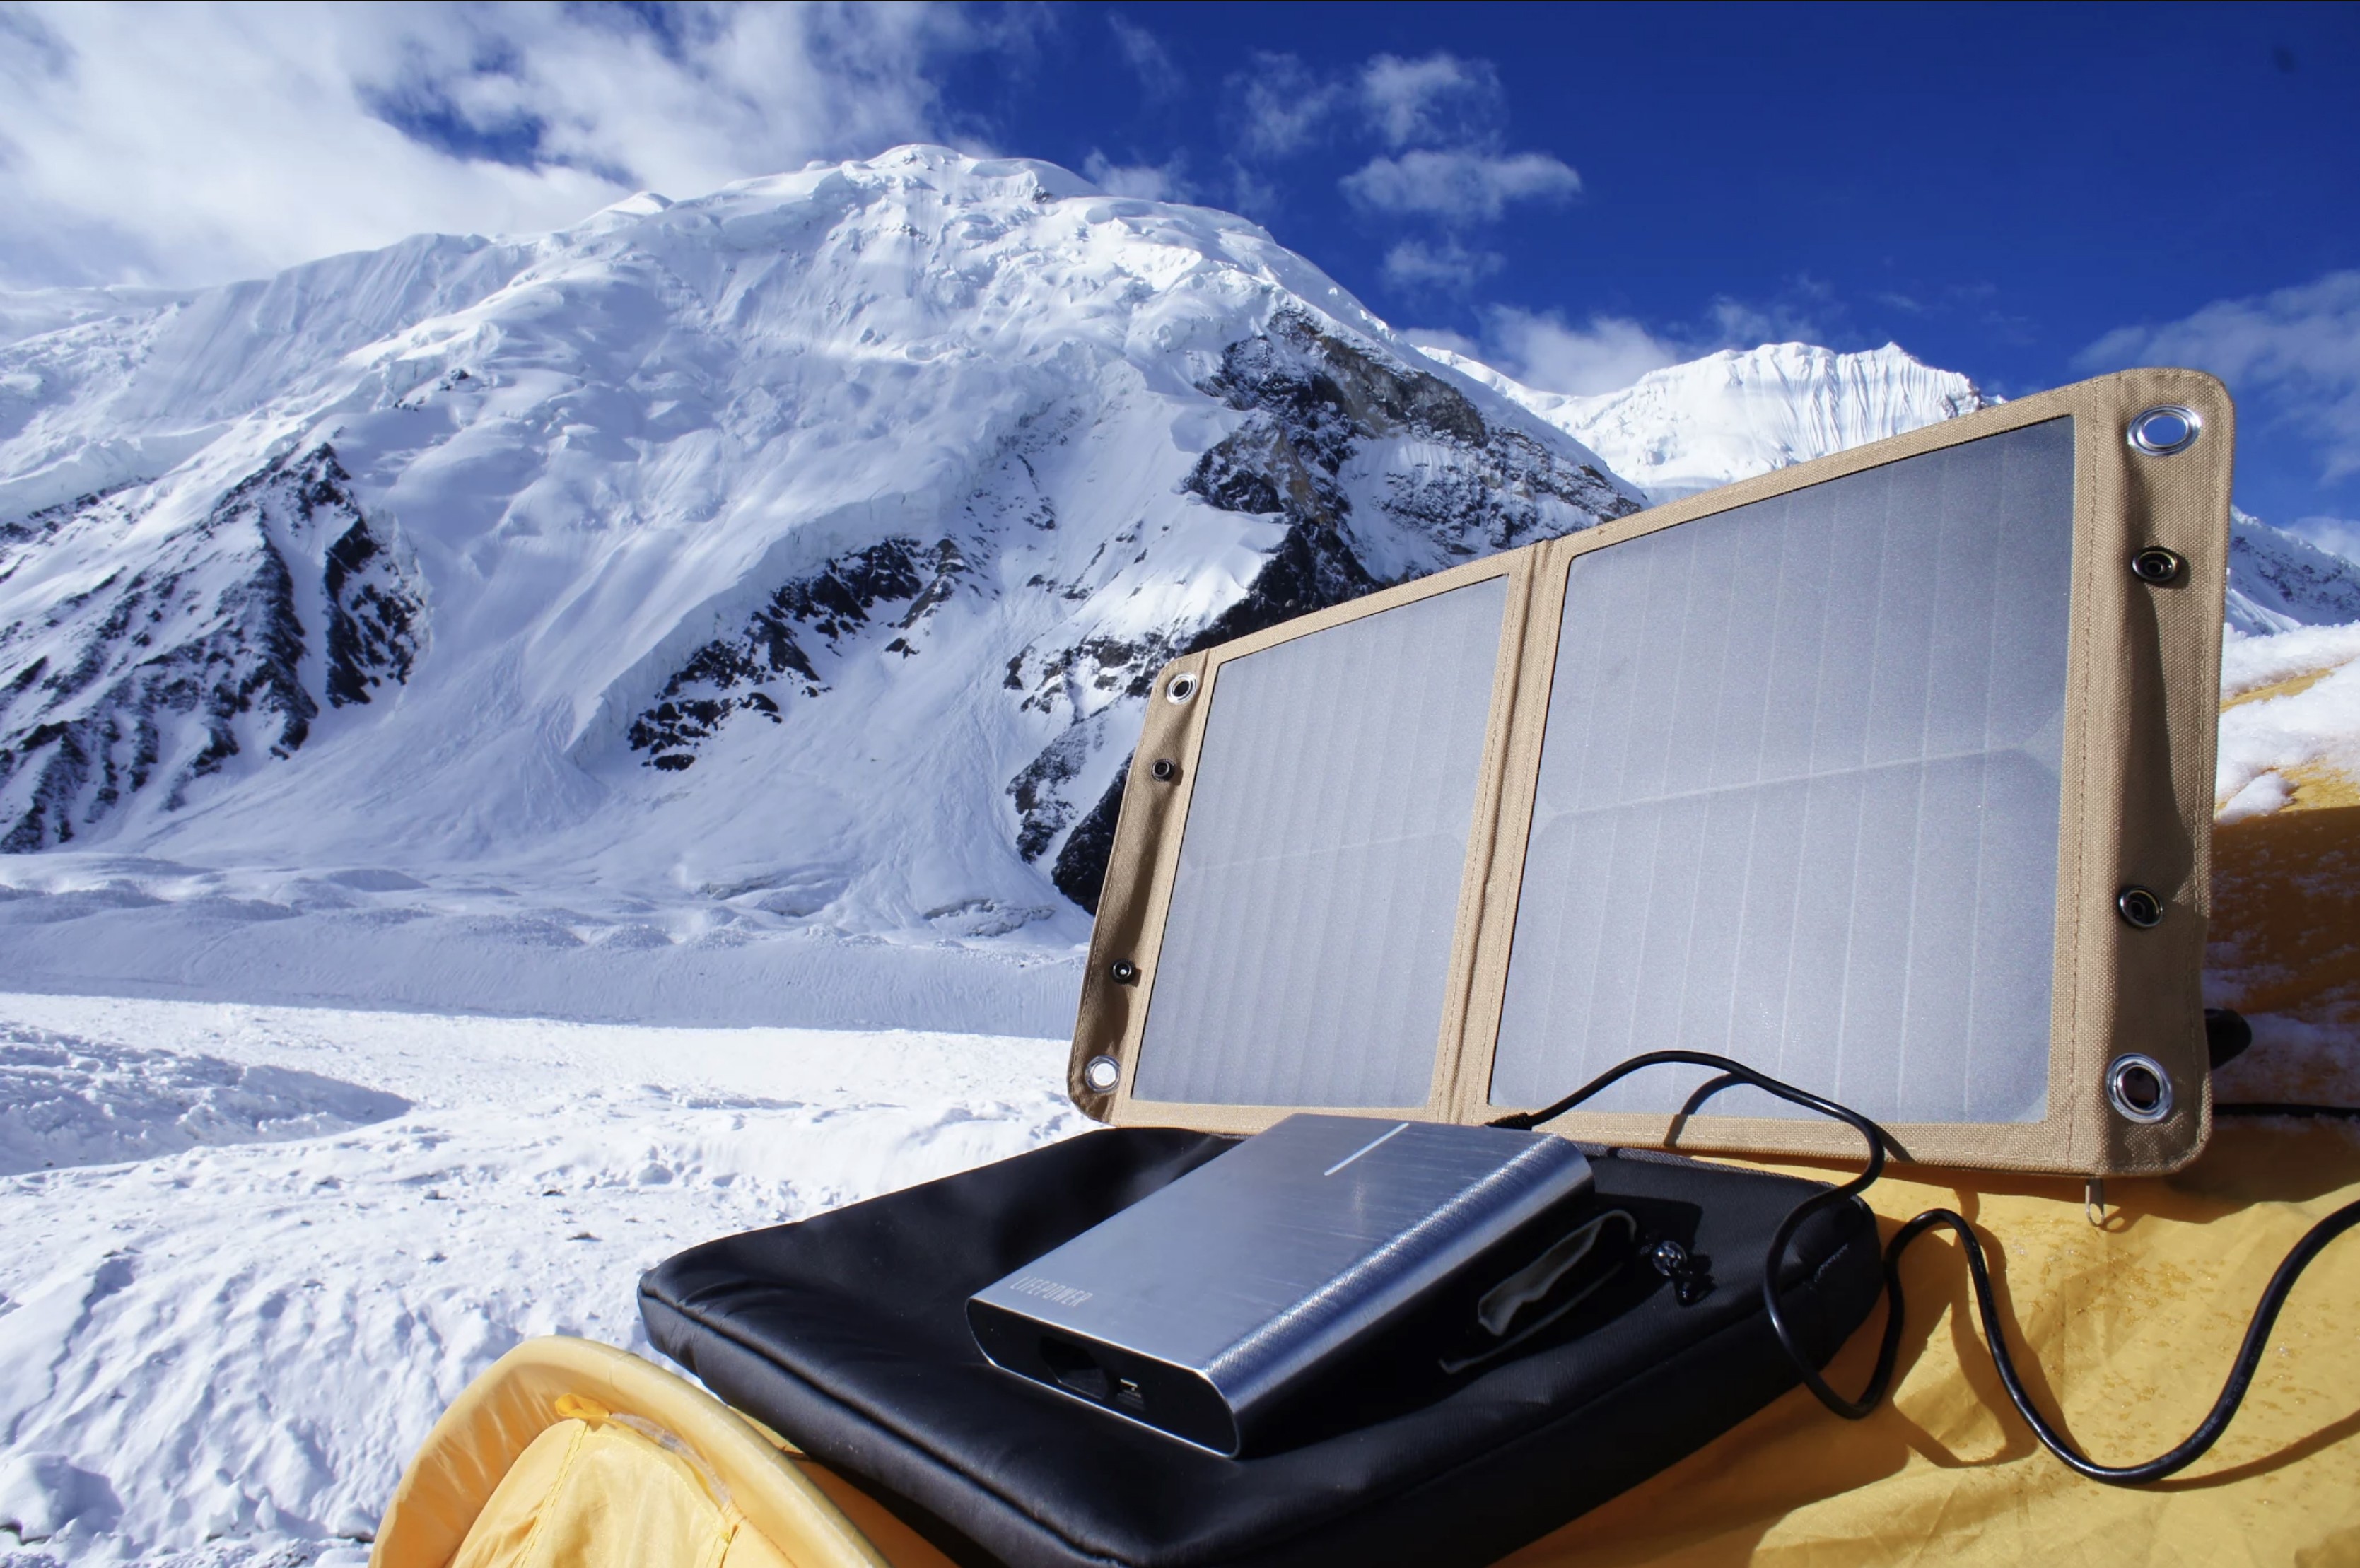 The LifePowr SUN20 portable solar panel will make sure you can explore completely off the grid, but still be kept tech savvy.